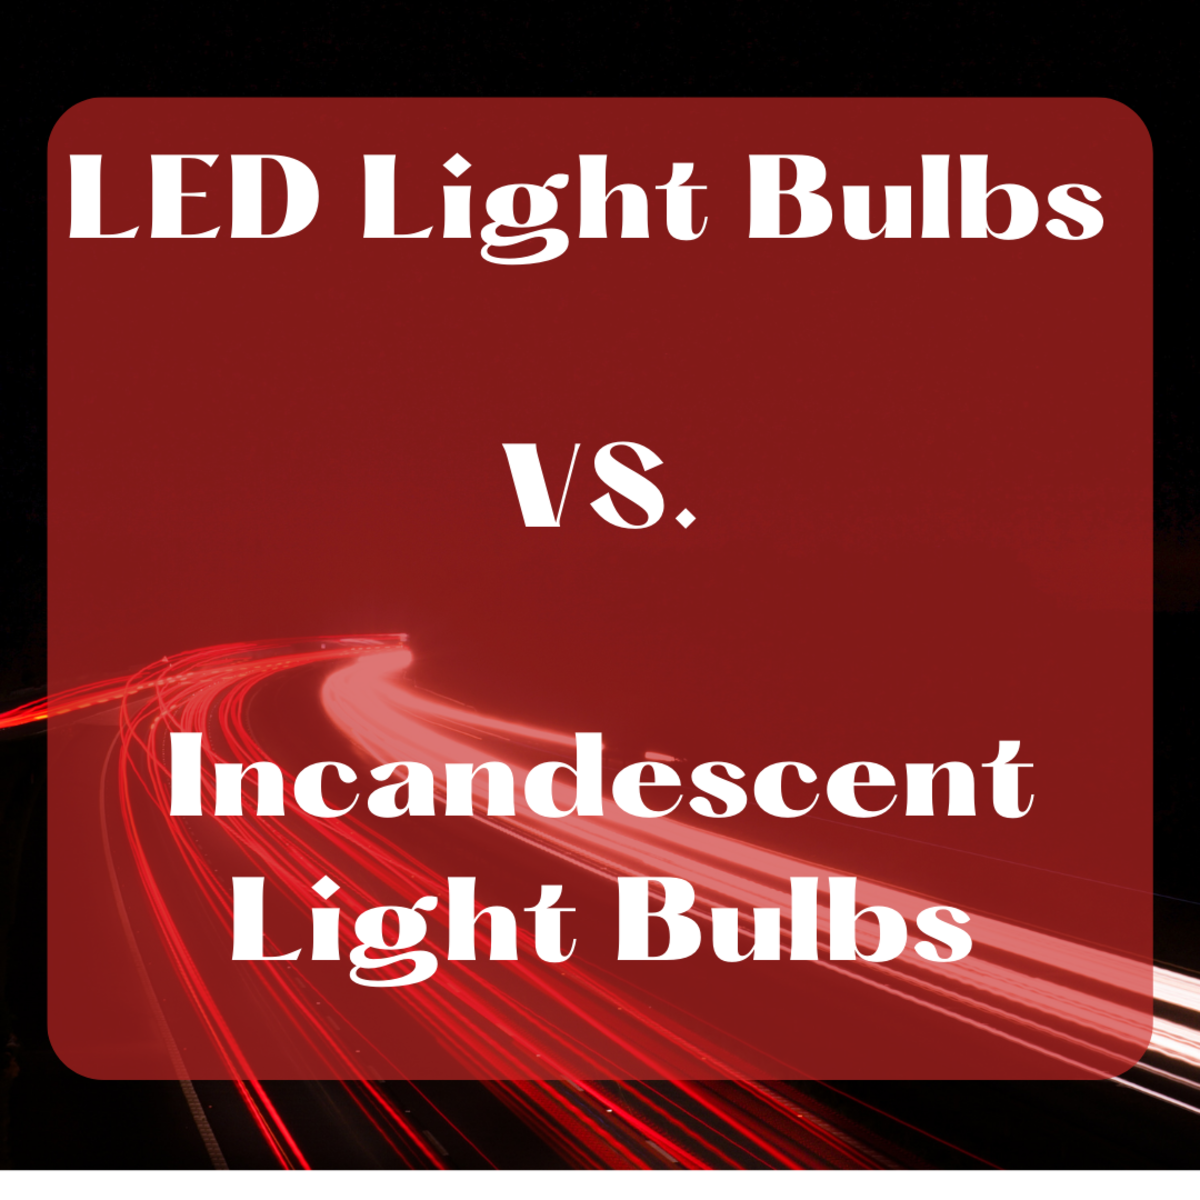 How Do LED Light Bulb Parts Compare in Savings and Construction to Incandescent (Regular) Light Bulbs?